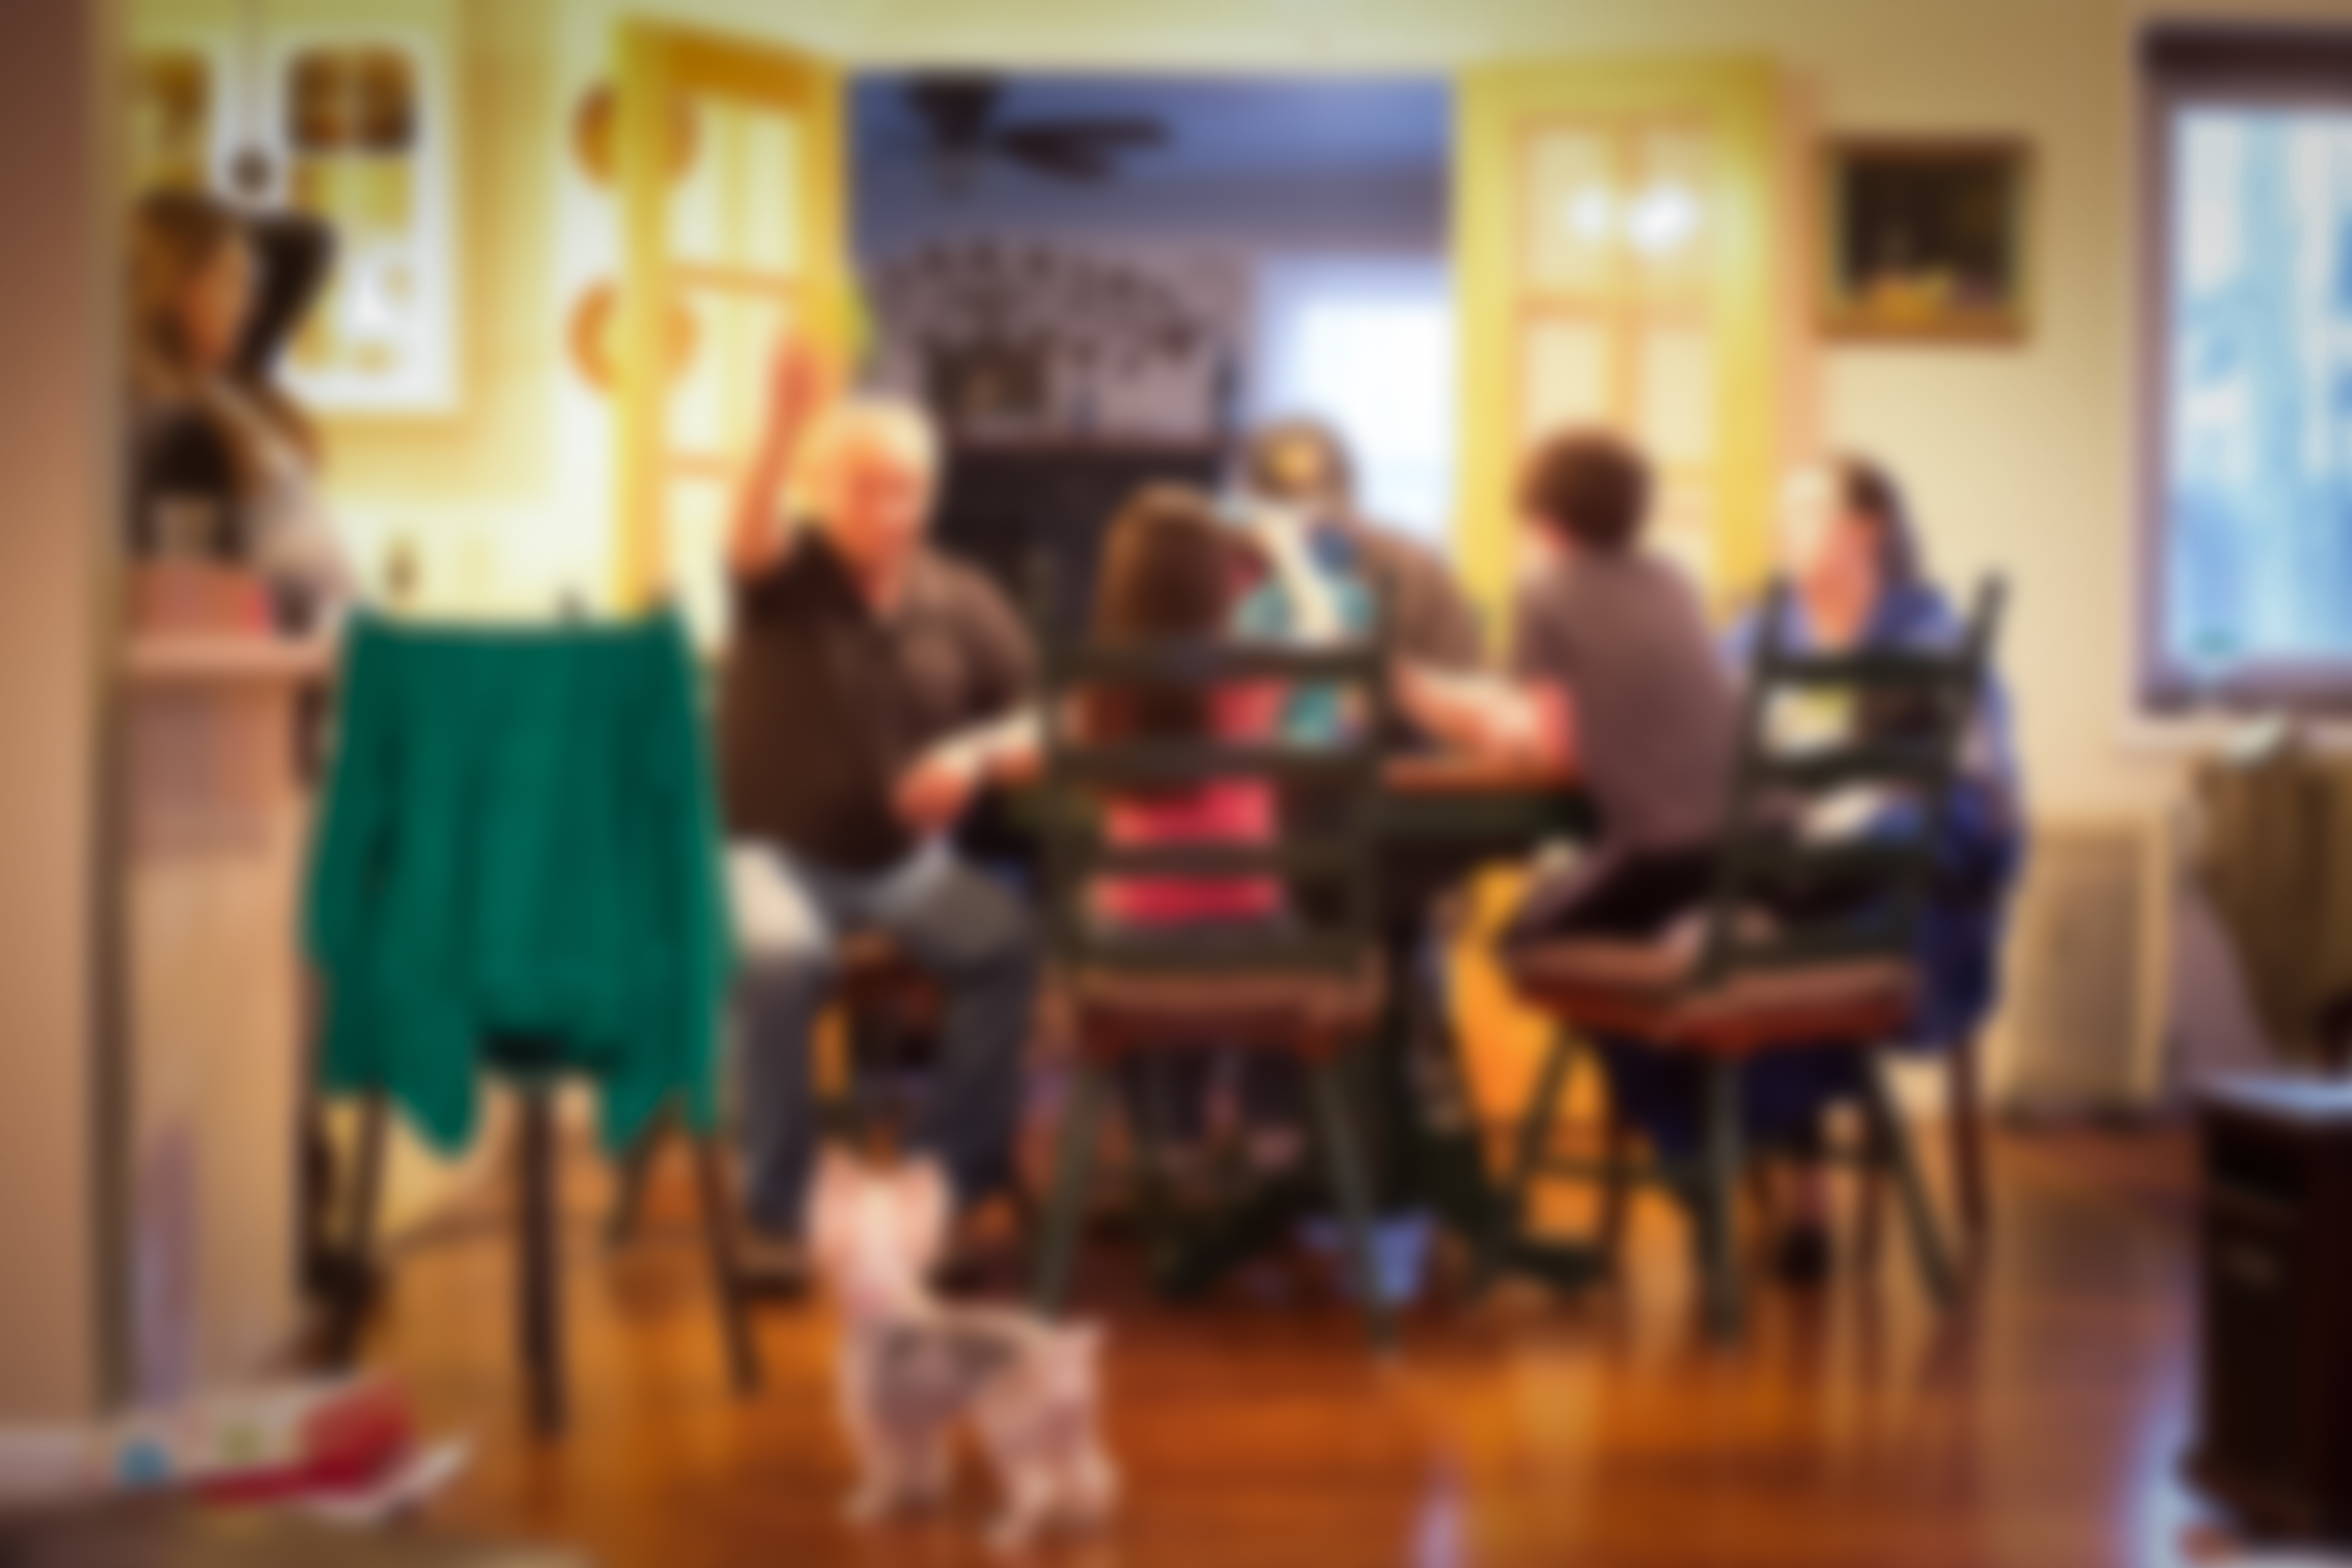 A blurred image of a family dinner | Source: Shutterstock